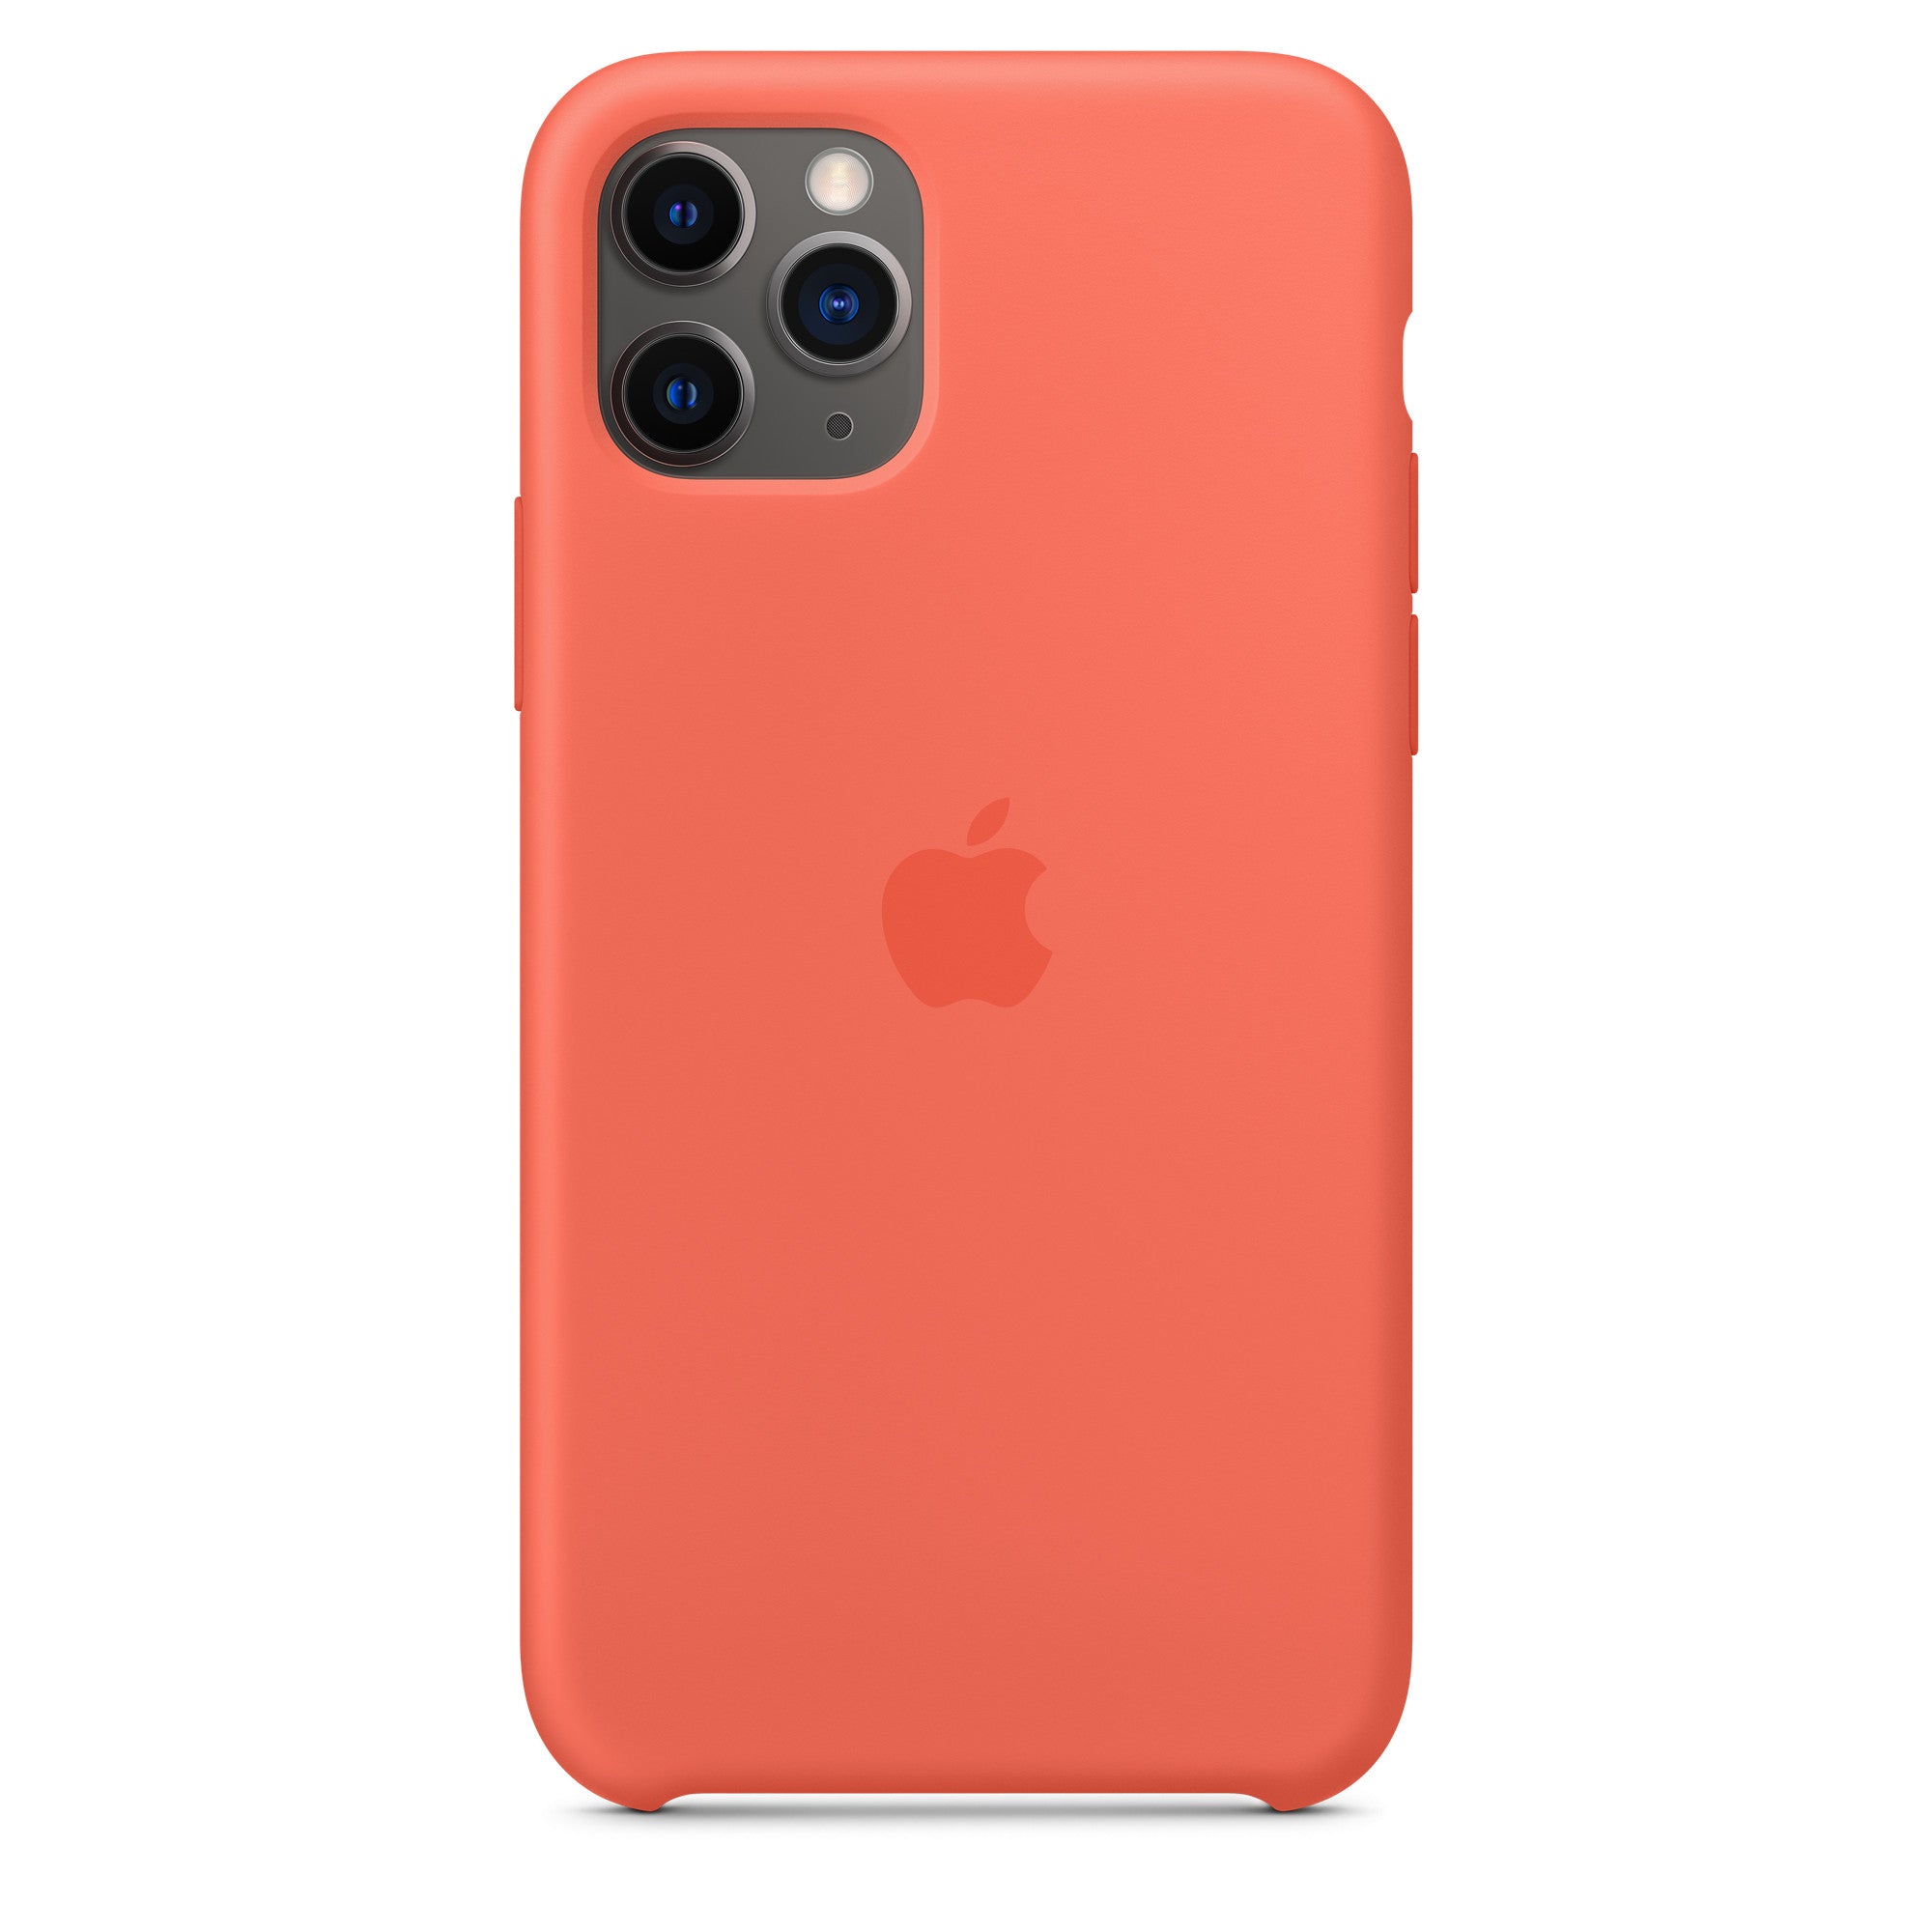 Apple iPhone 11 Pro Silicone Case - Clementine  - Brand New